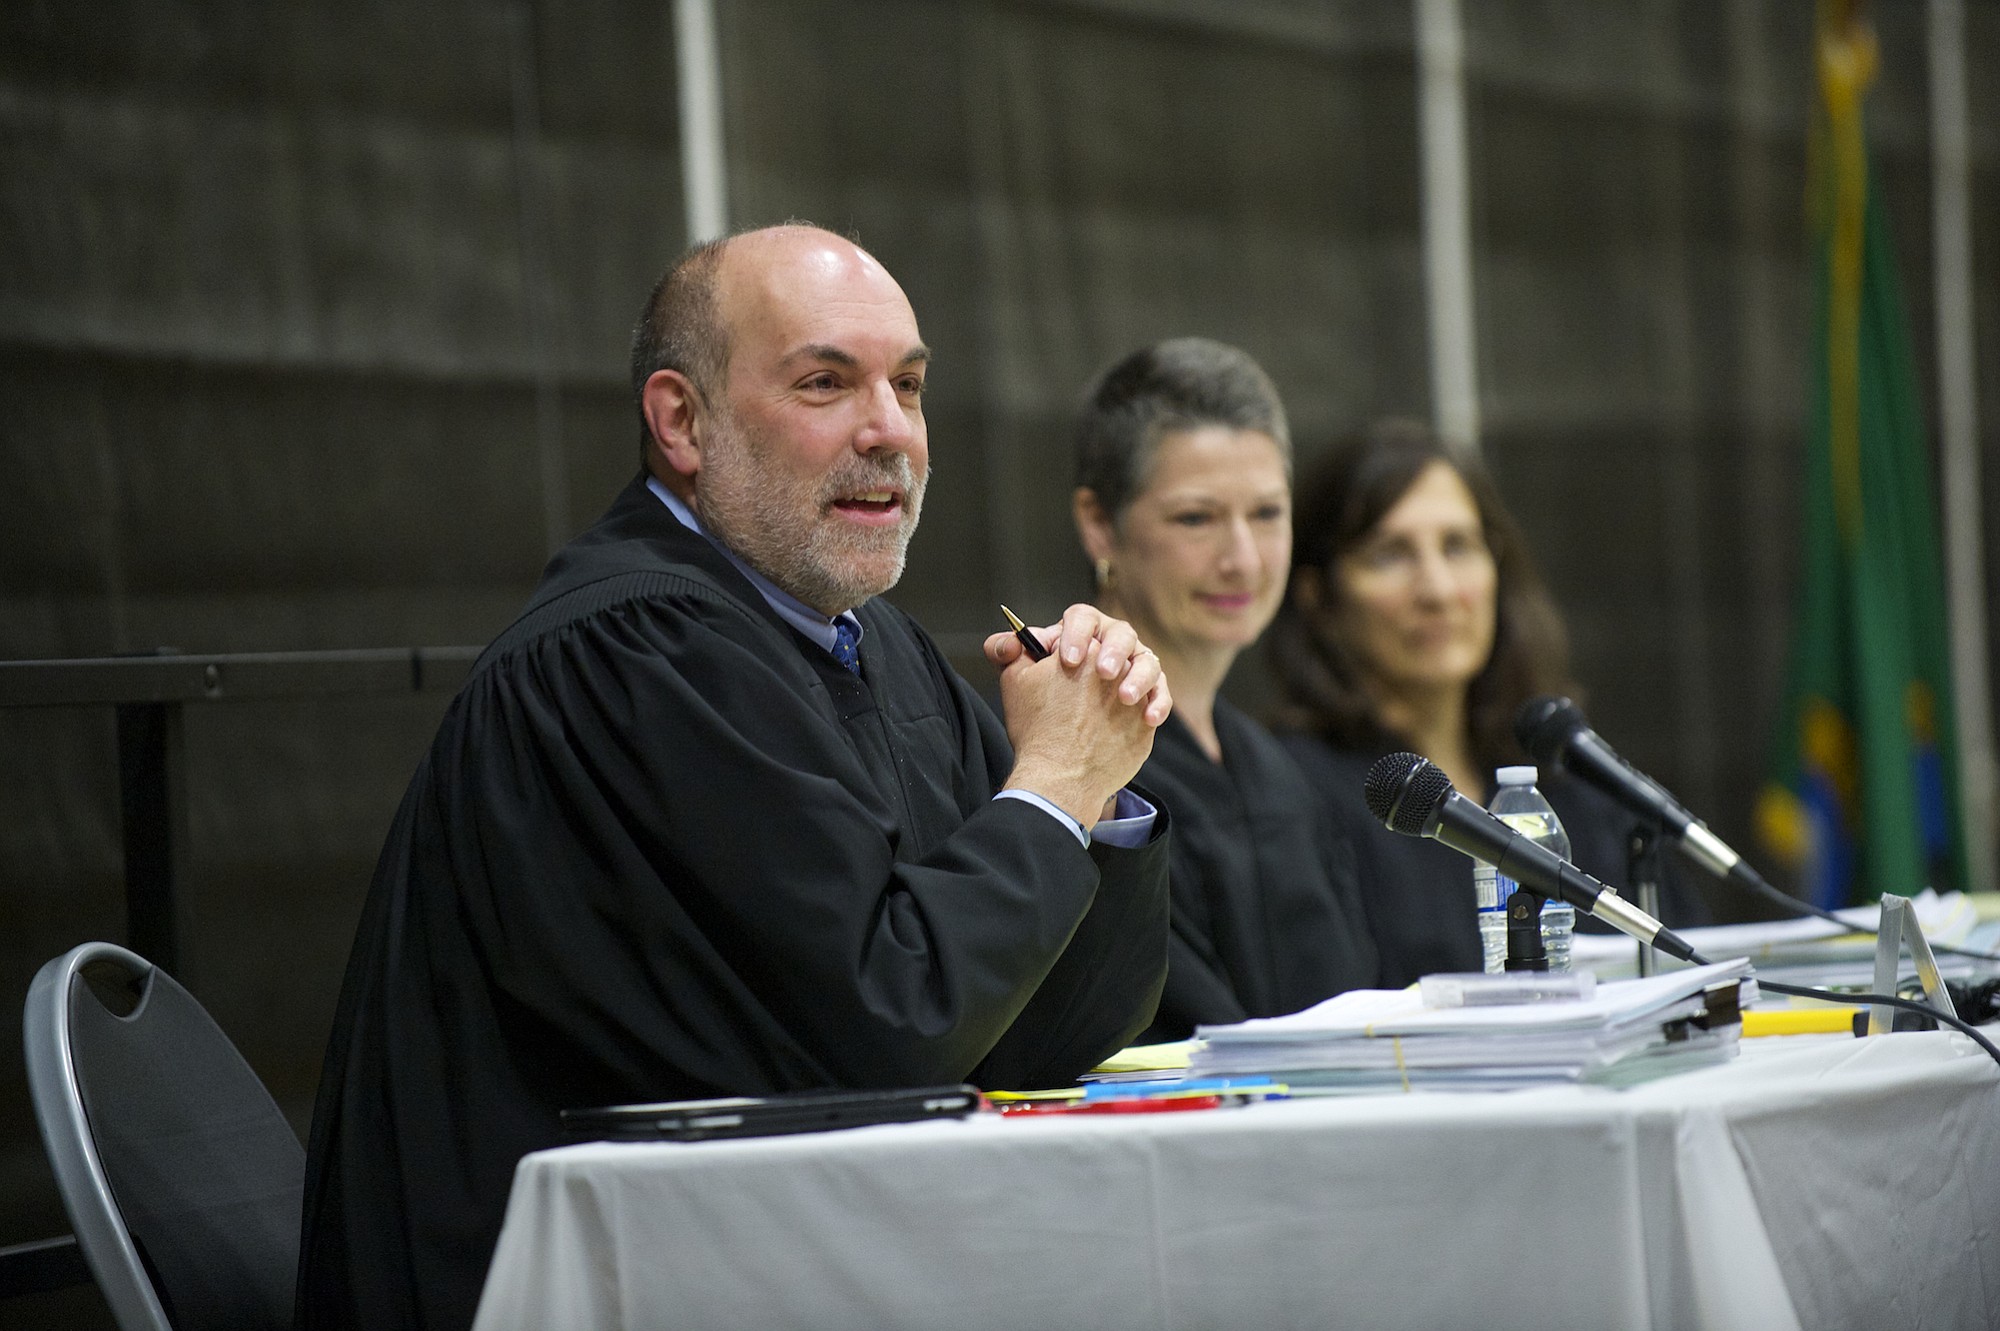 Washington State Court of Appeals Division II judges, from left, Rich Melnick, Jill Johanson and Lisa Worswick hear a local case at Hudson's Bay High School on Monday morning.